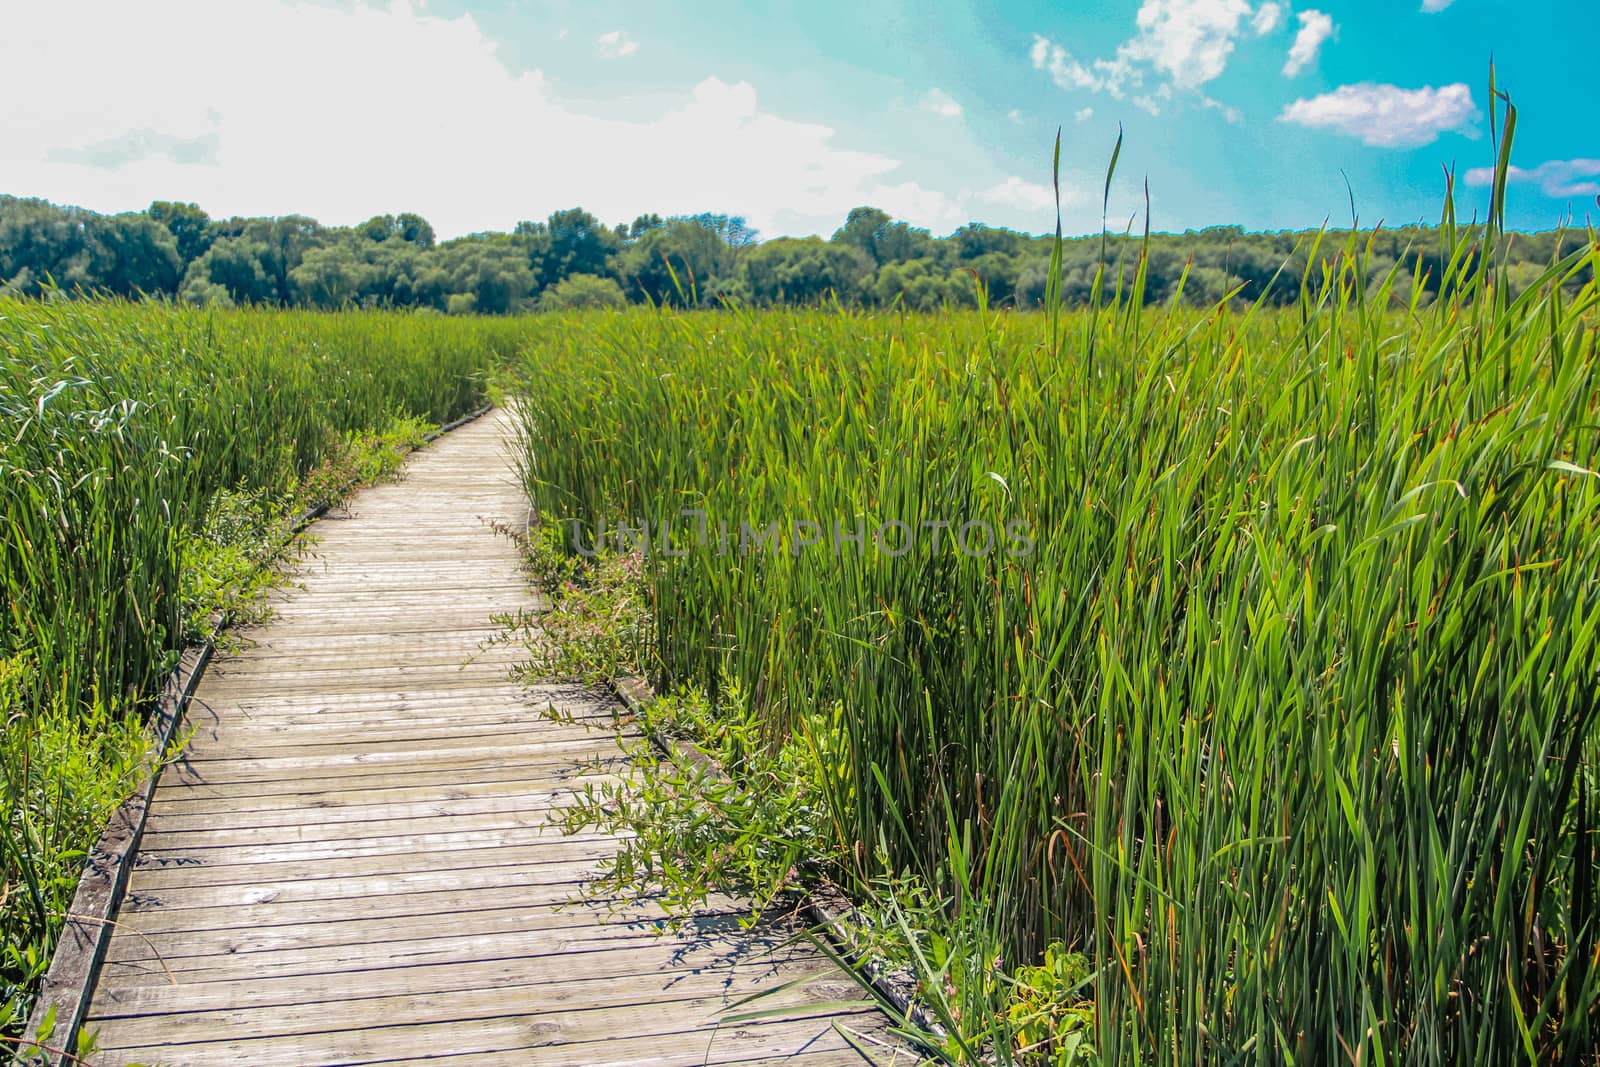 Wooden walk way in middle of a grass field during a sunny summer day 